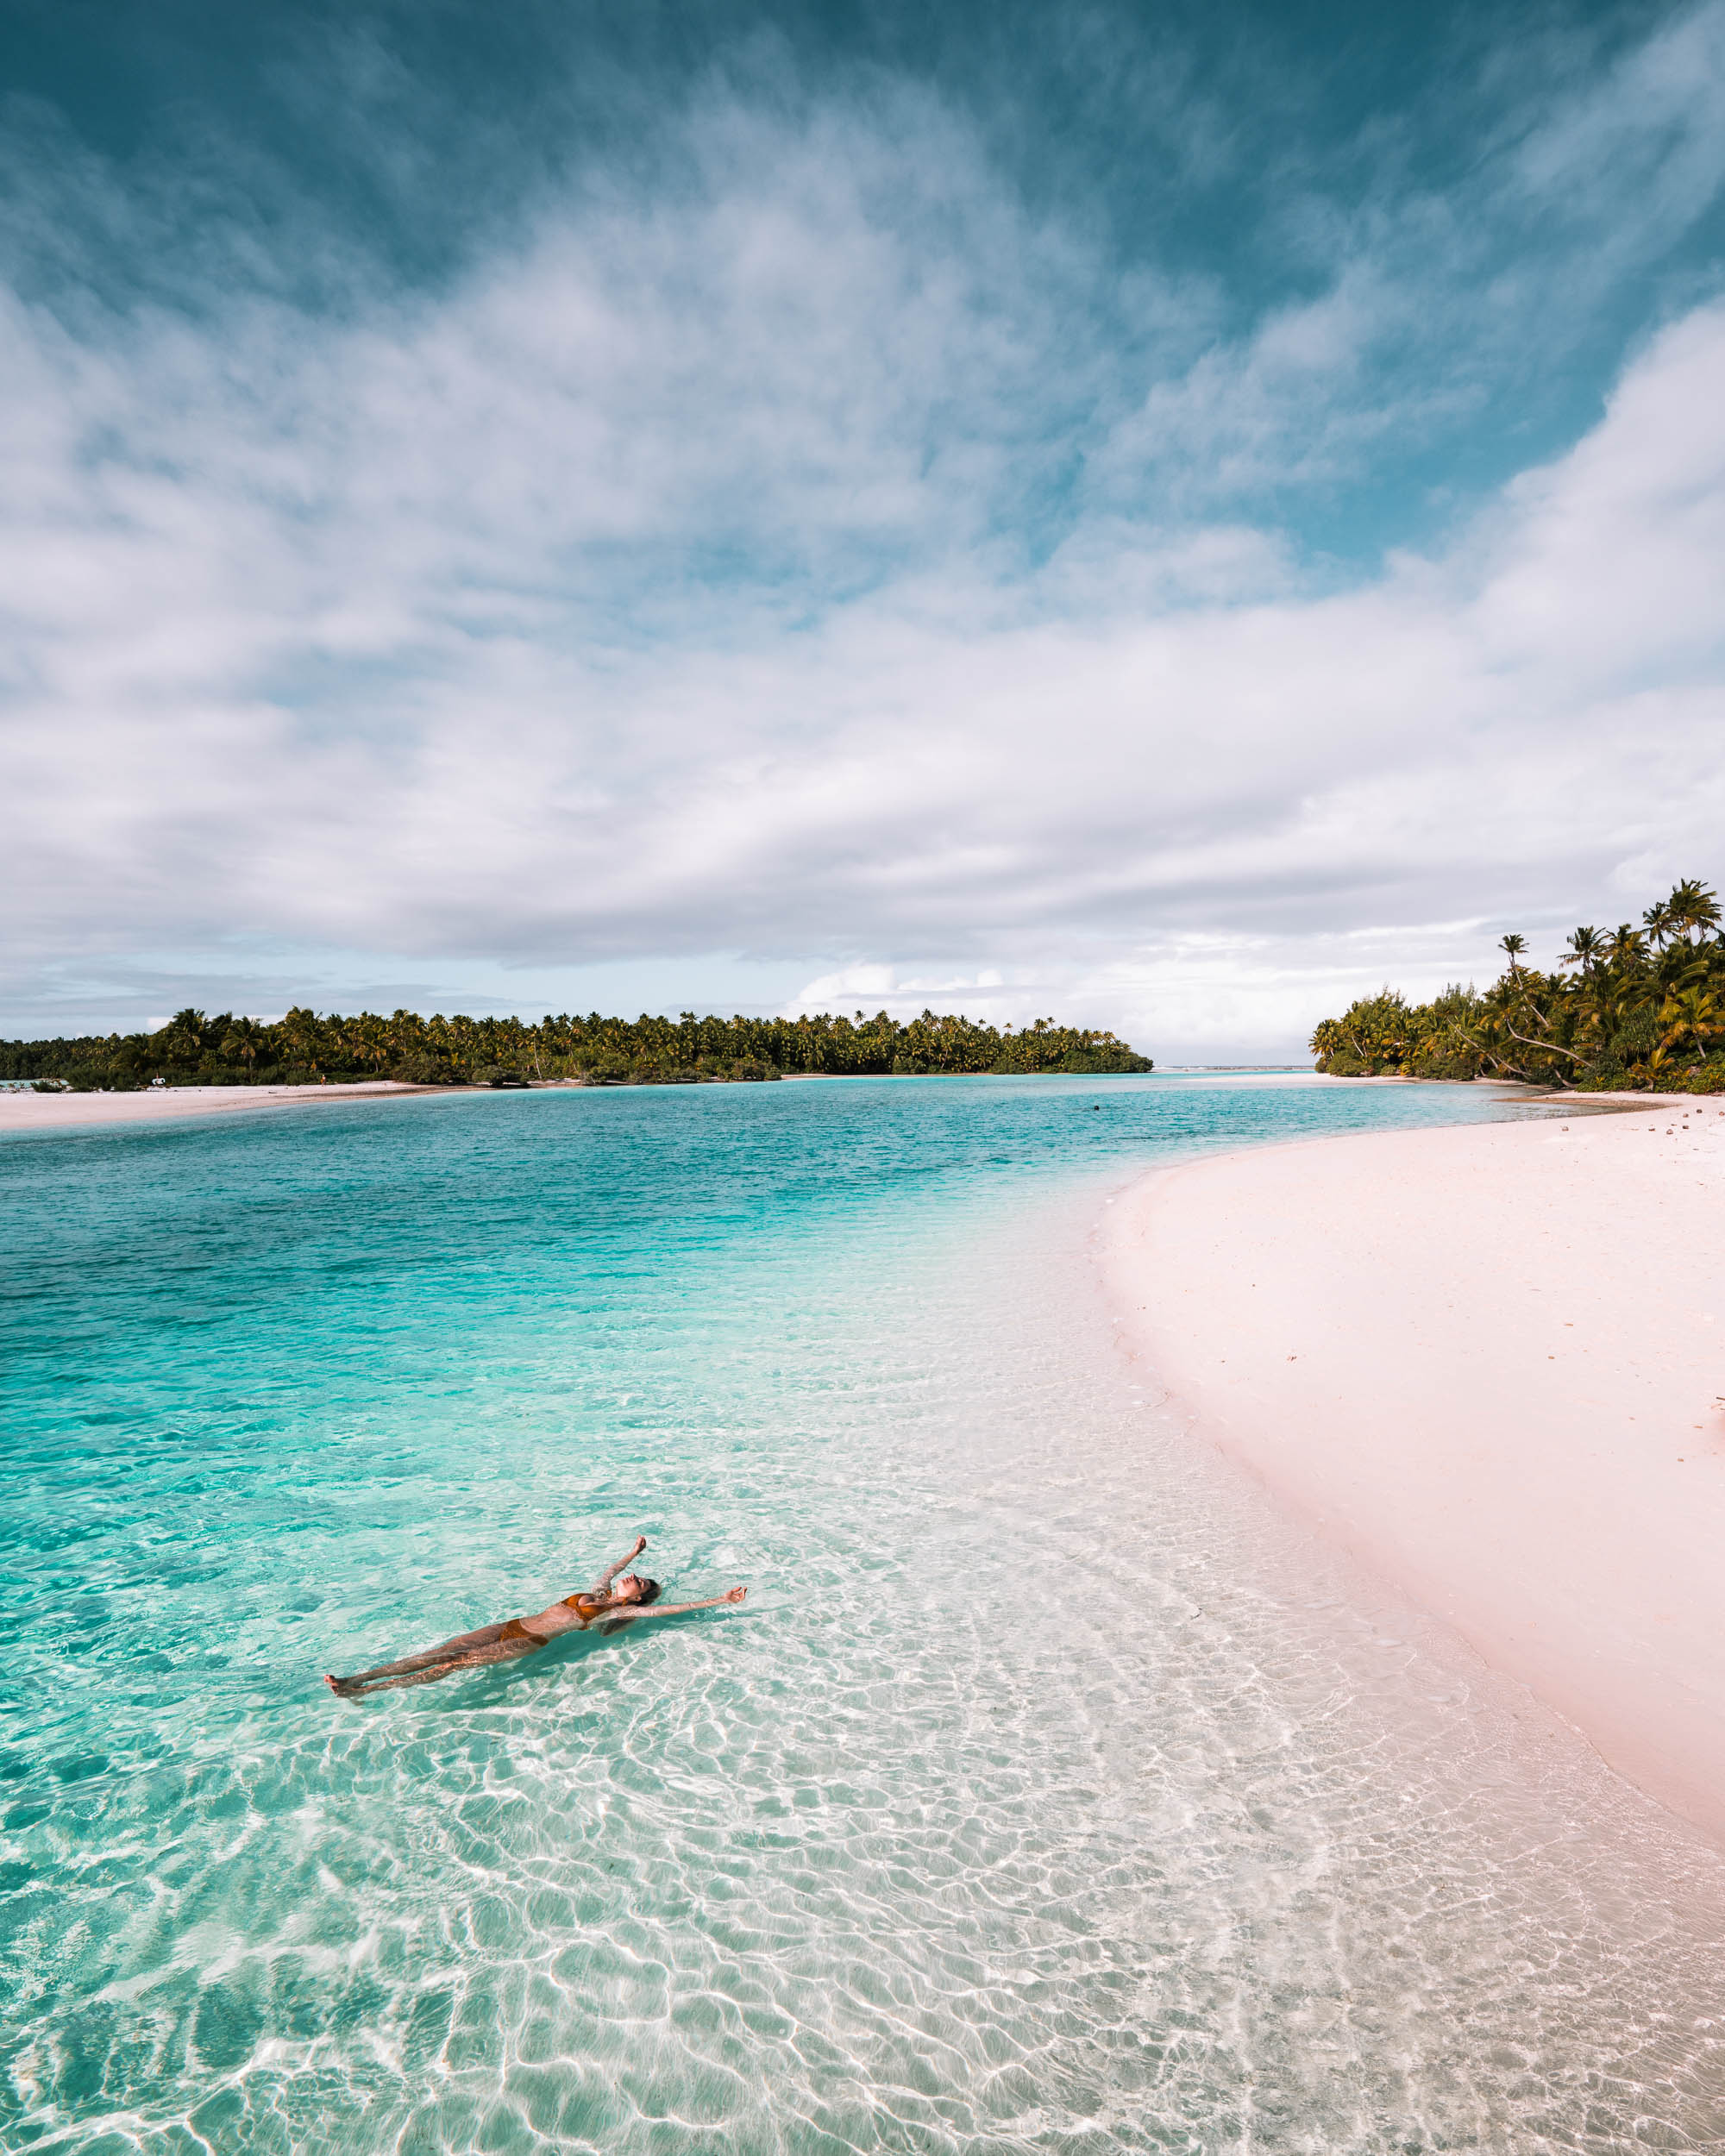 Floating in the most clear blue water at One Foot Island in the Cook Islands